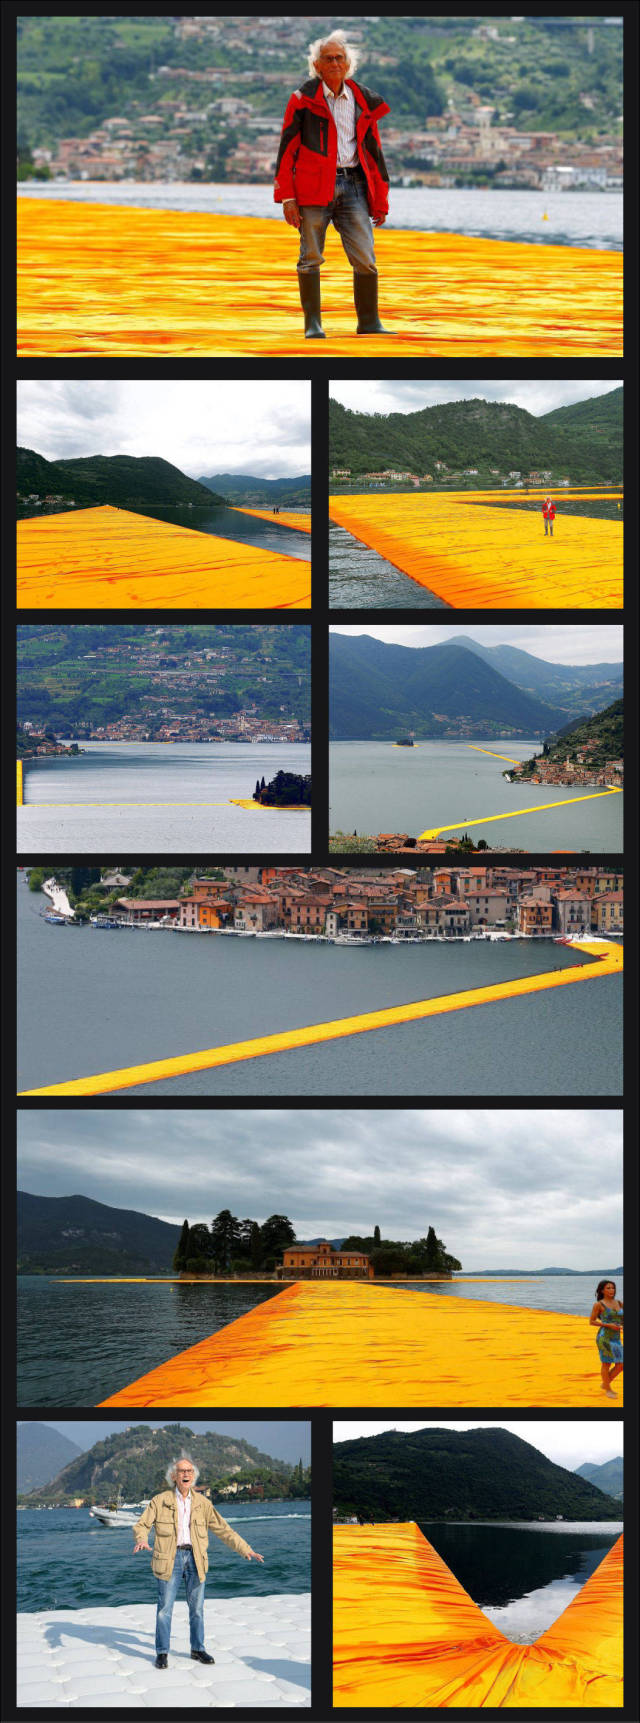 Floating Piers Installed On Lake Iseo In Italy (27 pics)